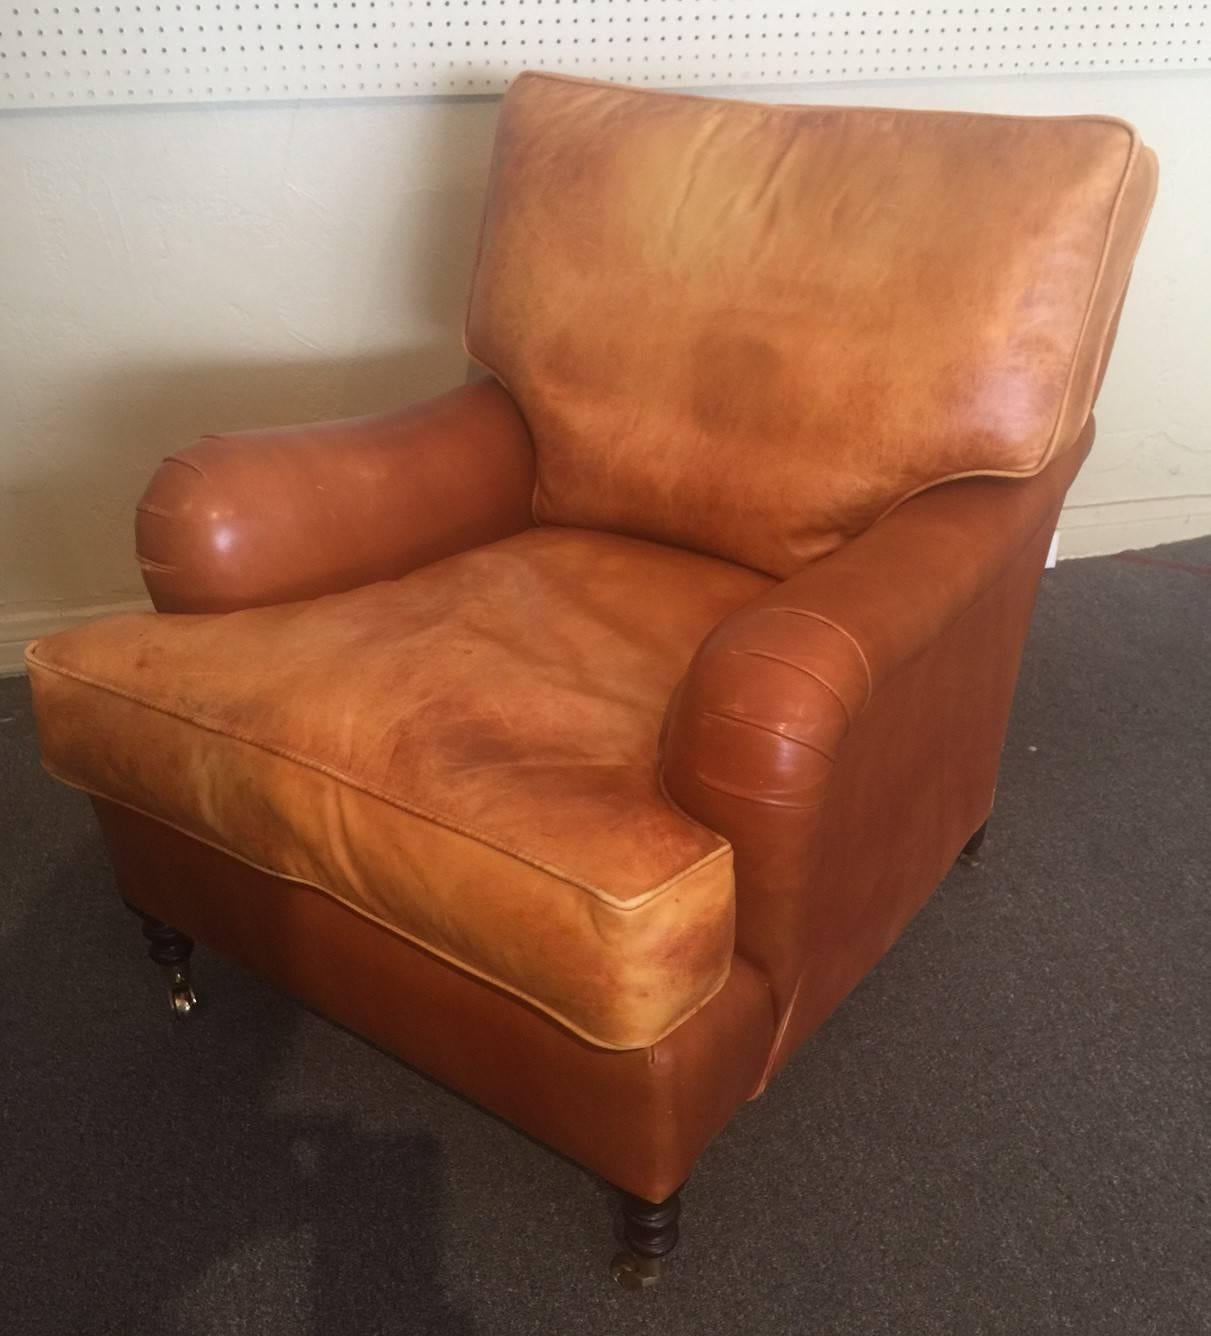 A classic pair of distressed leather club chairs by renowned English furniture maker George Smith. The chairs feature solid wood turned legs with brass casters. Great traditional look!